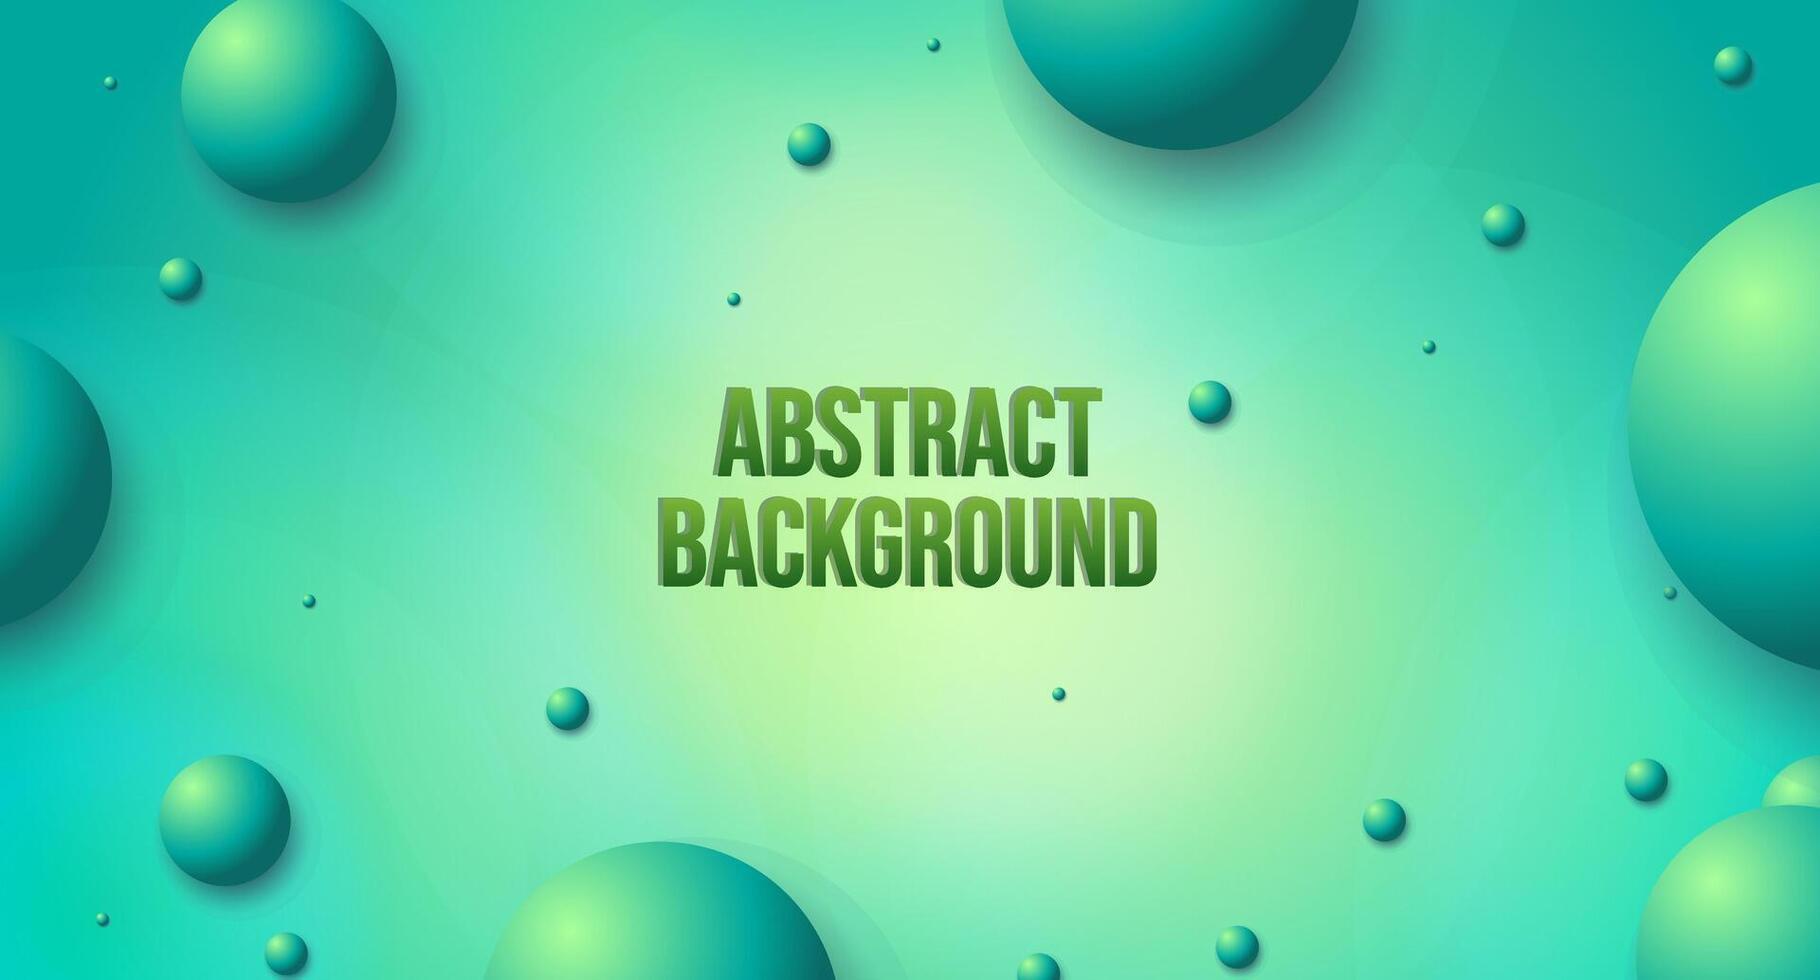 Abstract background with 3D spheres, vector artwork in green gradient color, ideal for cover designs, wallpapers, ad banners, and presentation backgrounds.